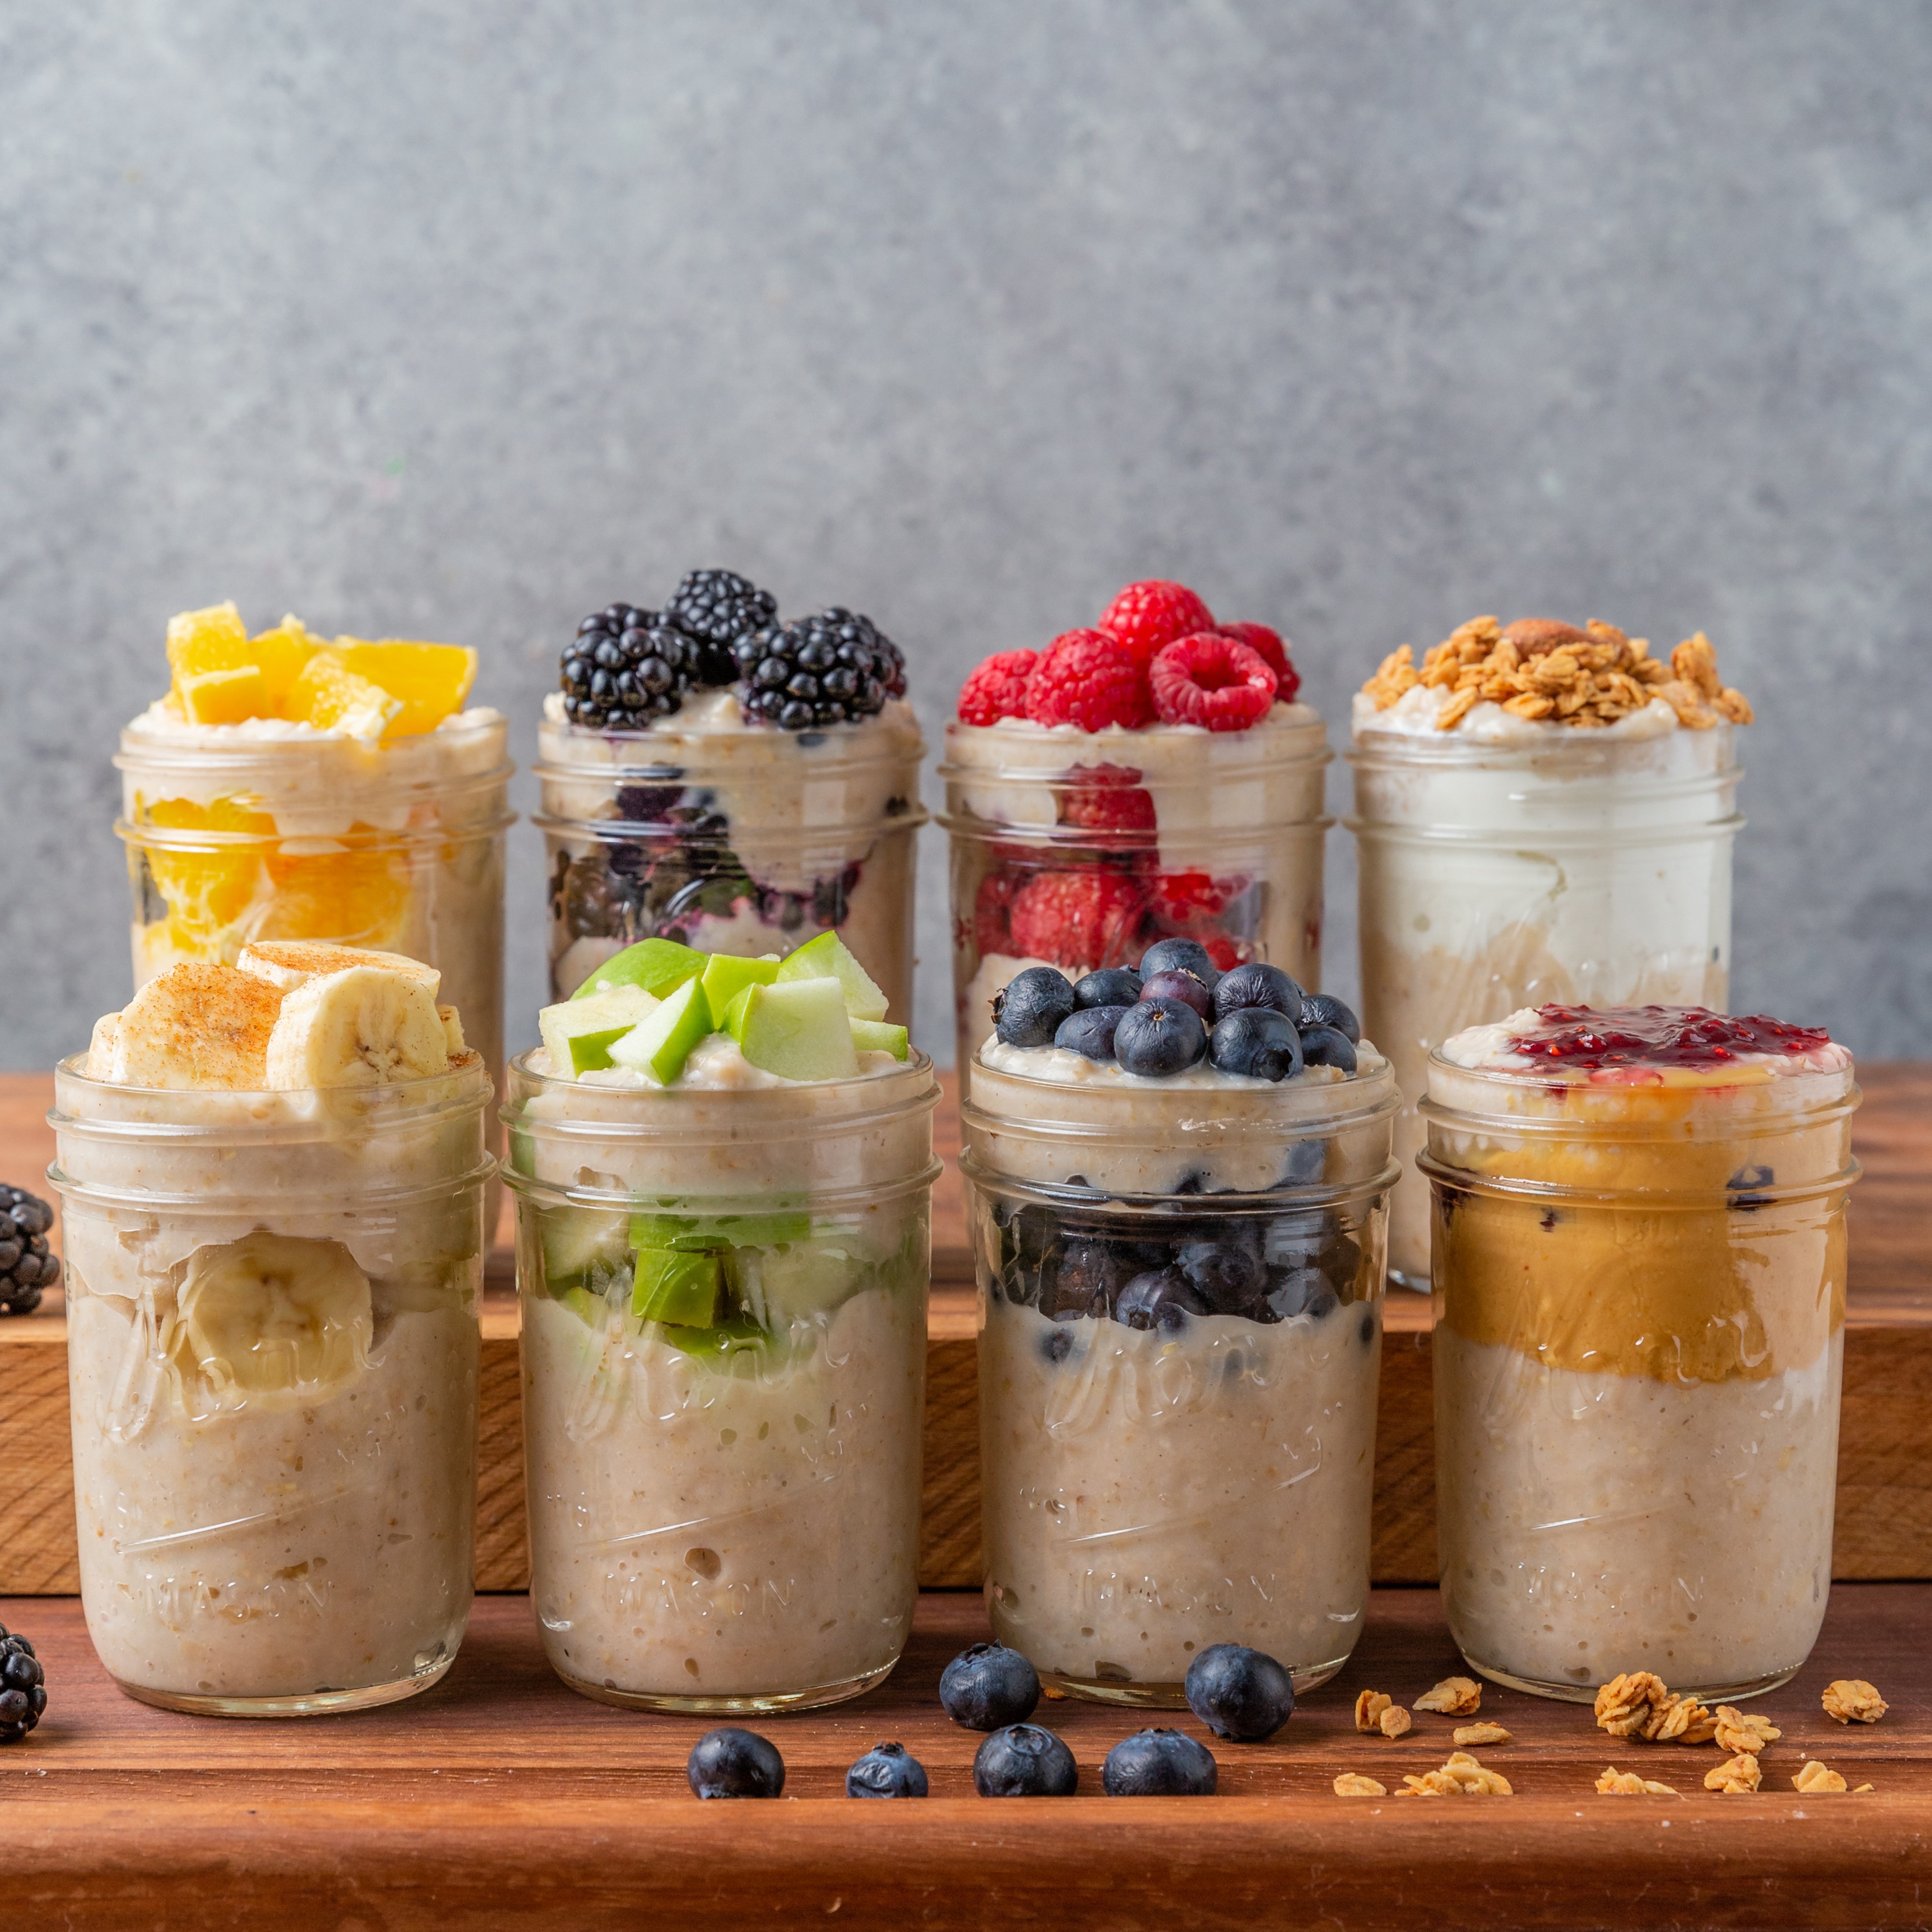 10 Oatmeal Cup Recipes to Meal Prep for Quick and Easy Breakfasts